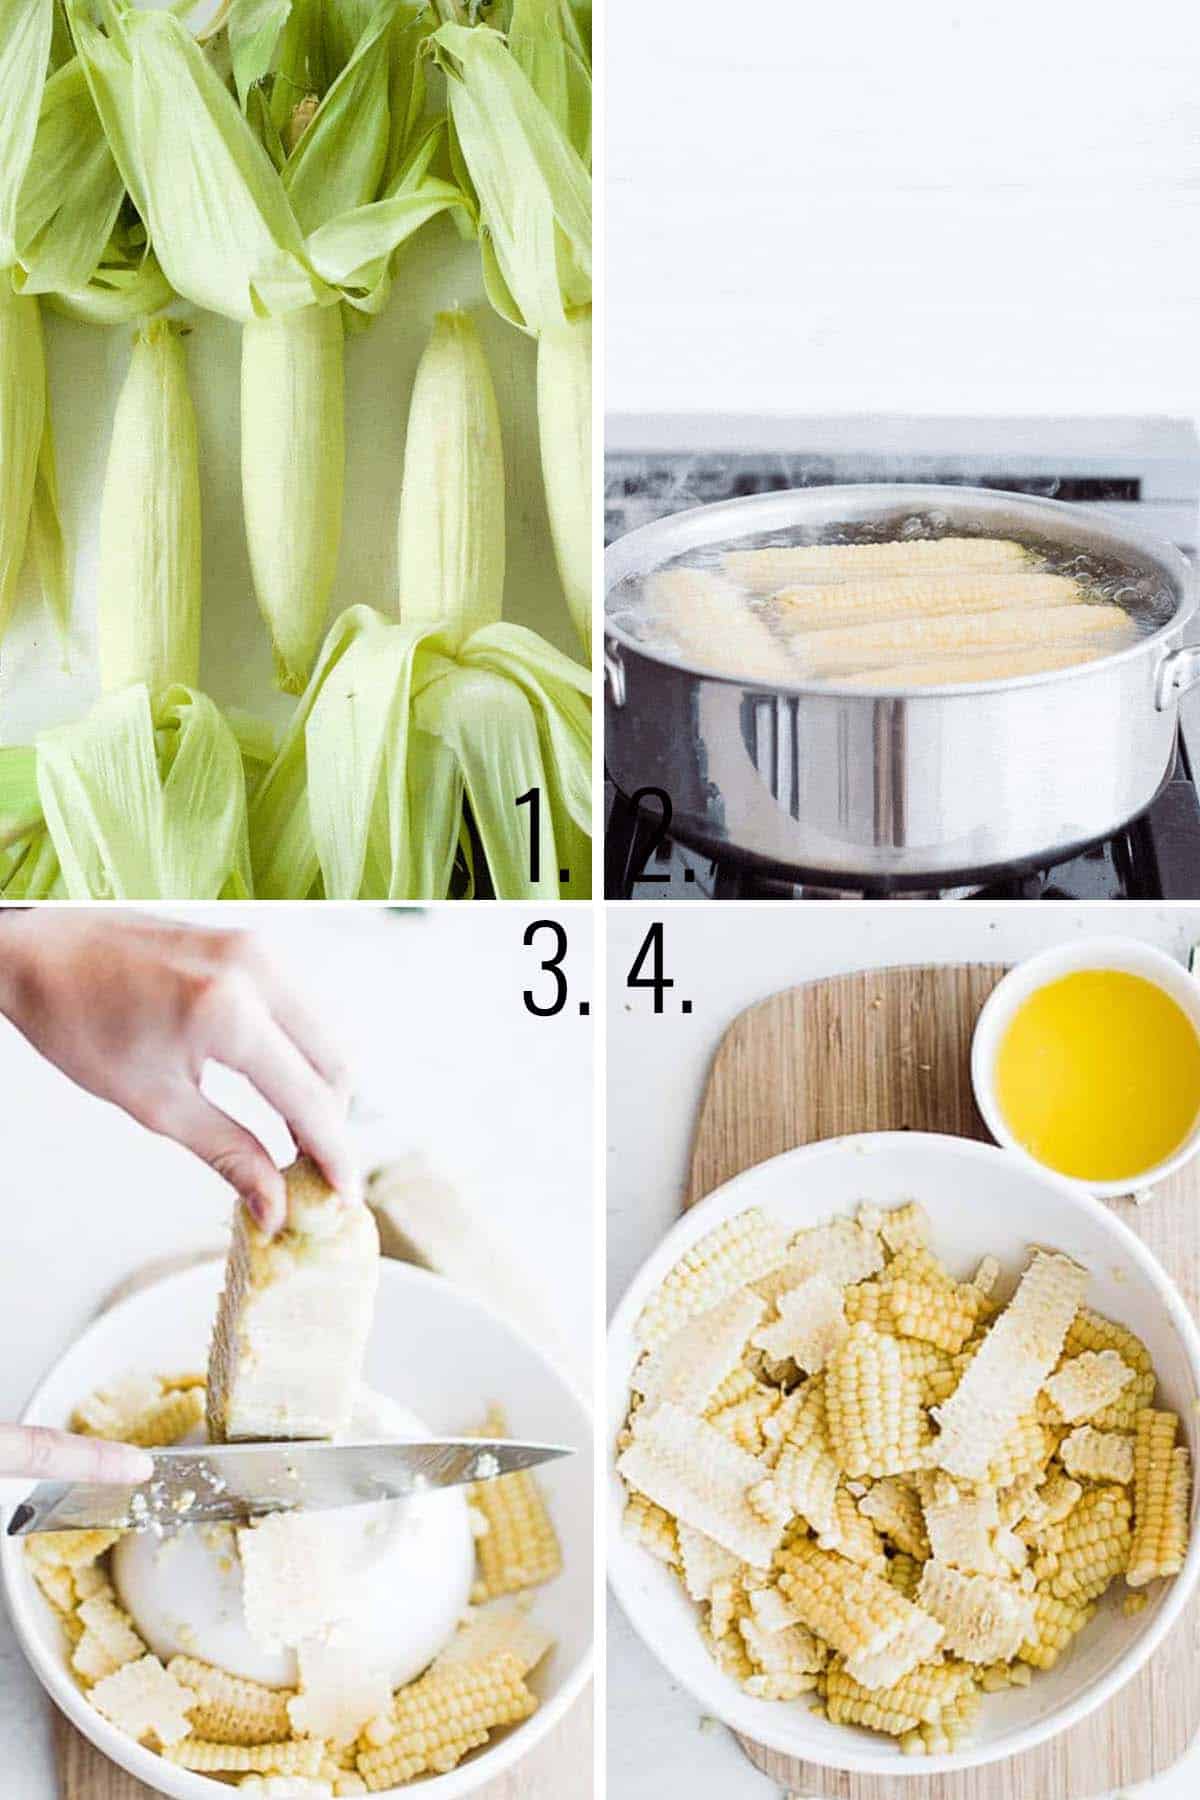 A collage showing the corn in husks, cooking on the stove, trimming the corn, and mixing with butter.